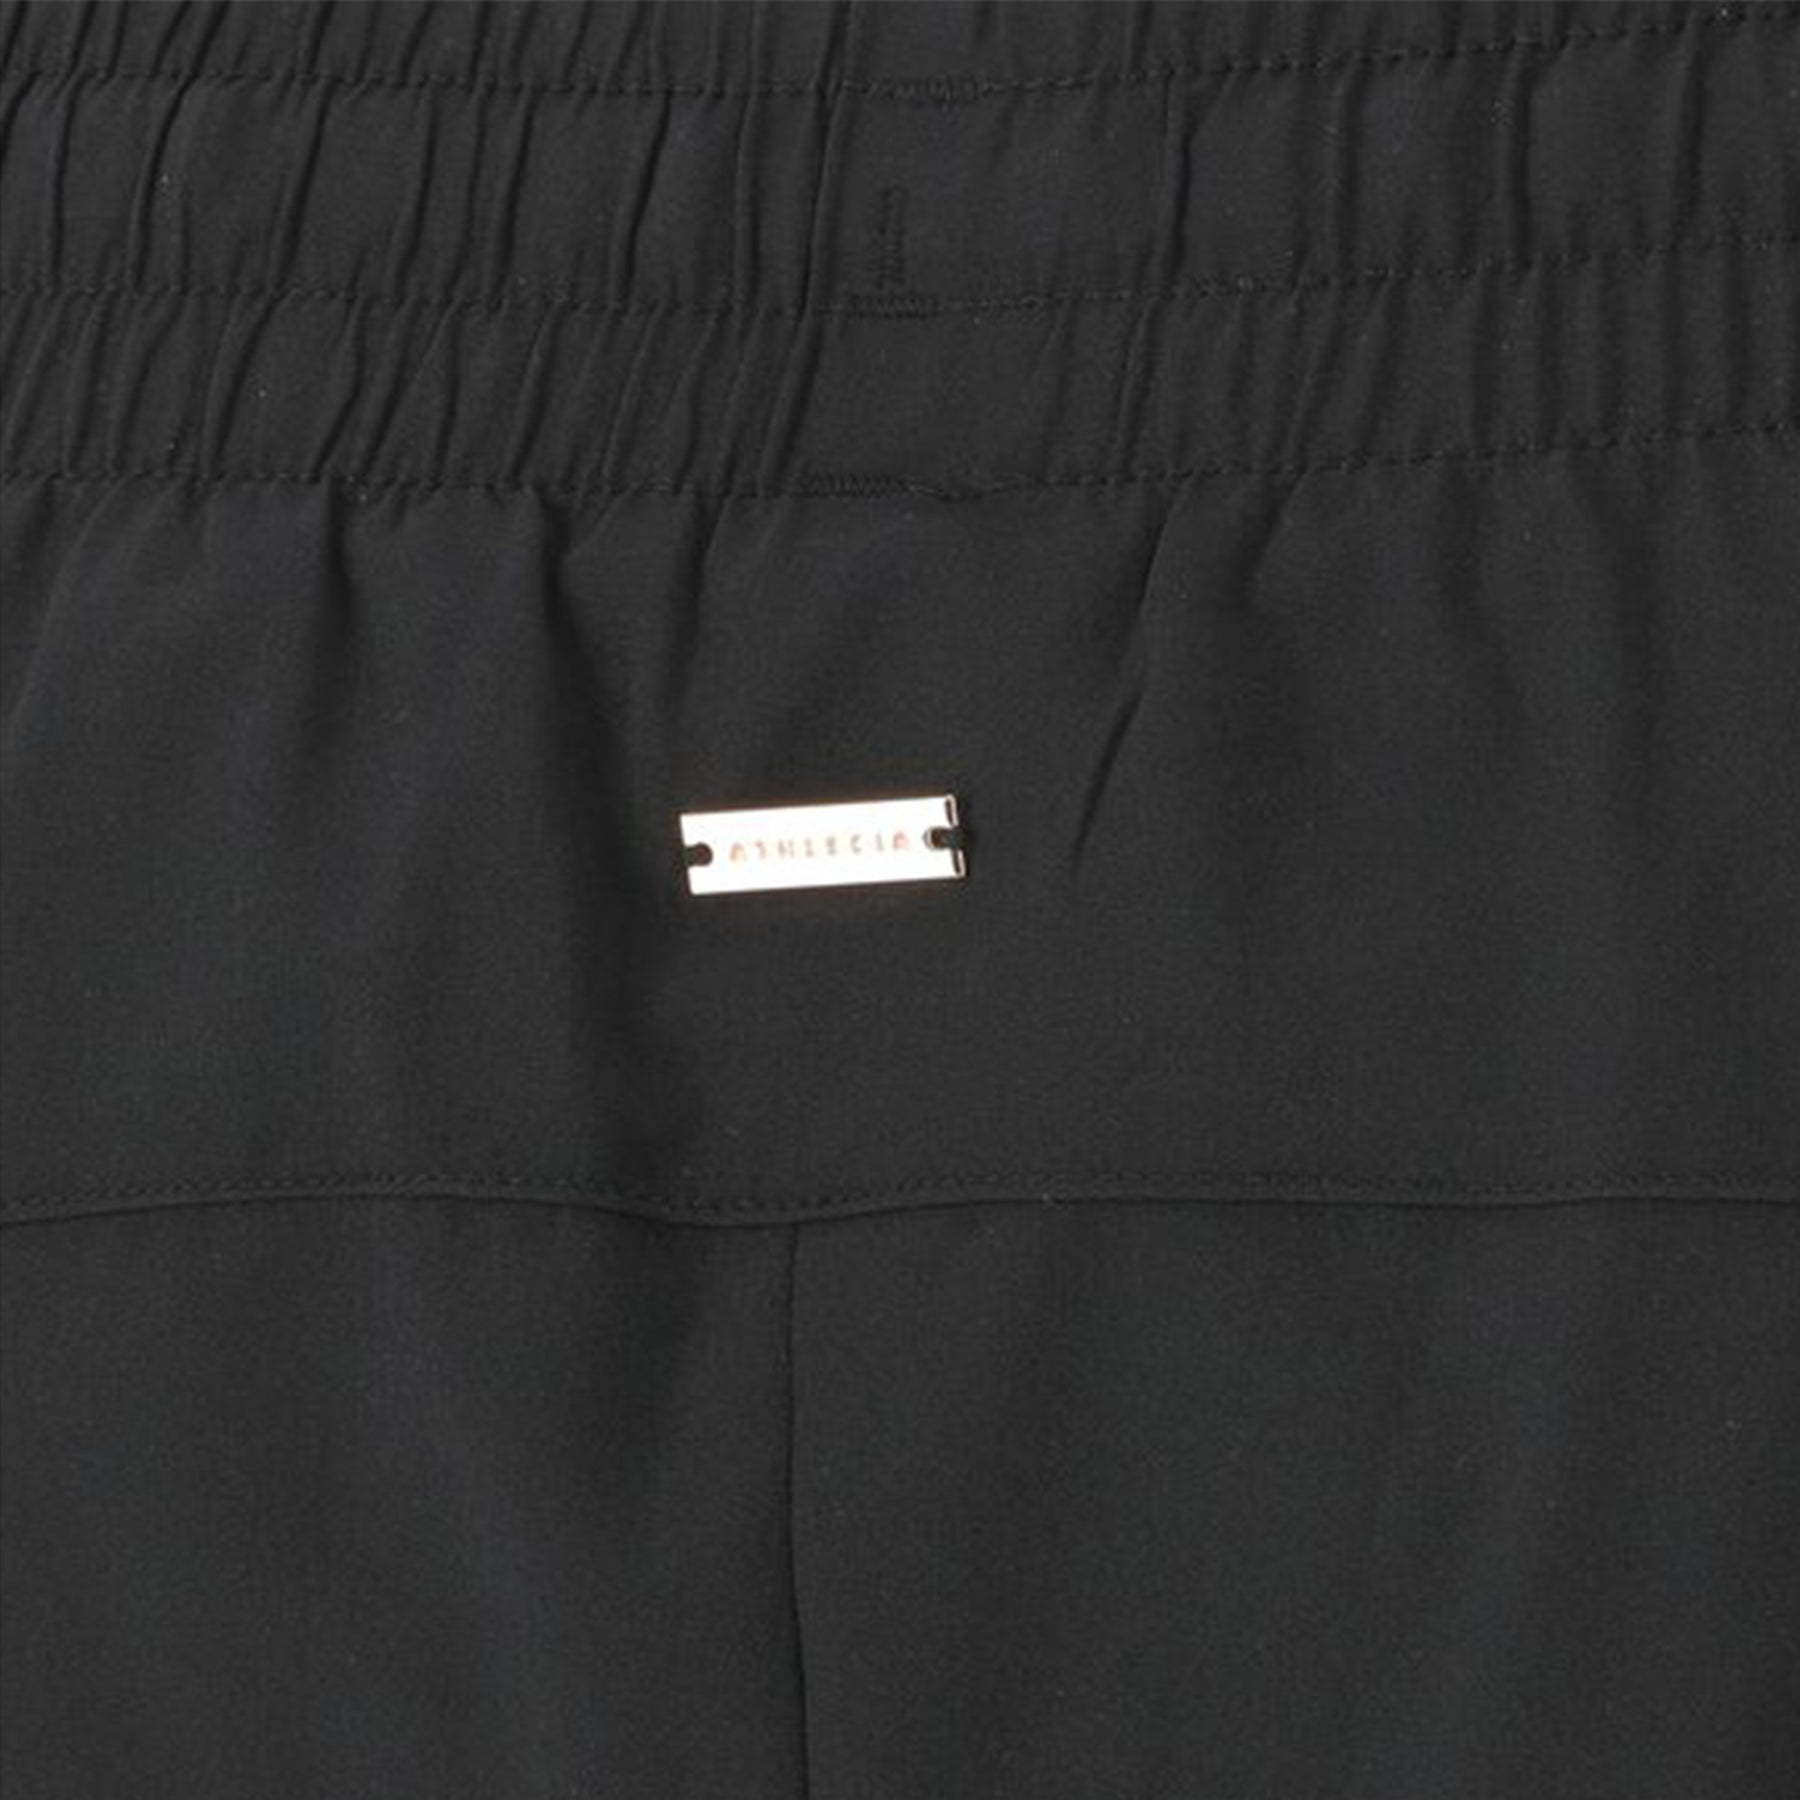 Athlecia Timmie Womens 2in1 Shorts:Black